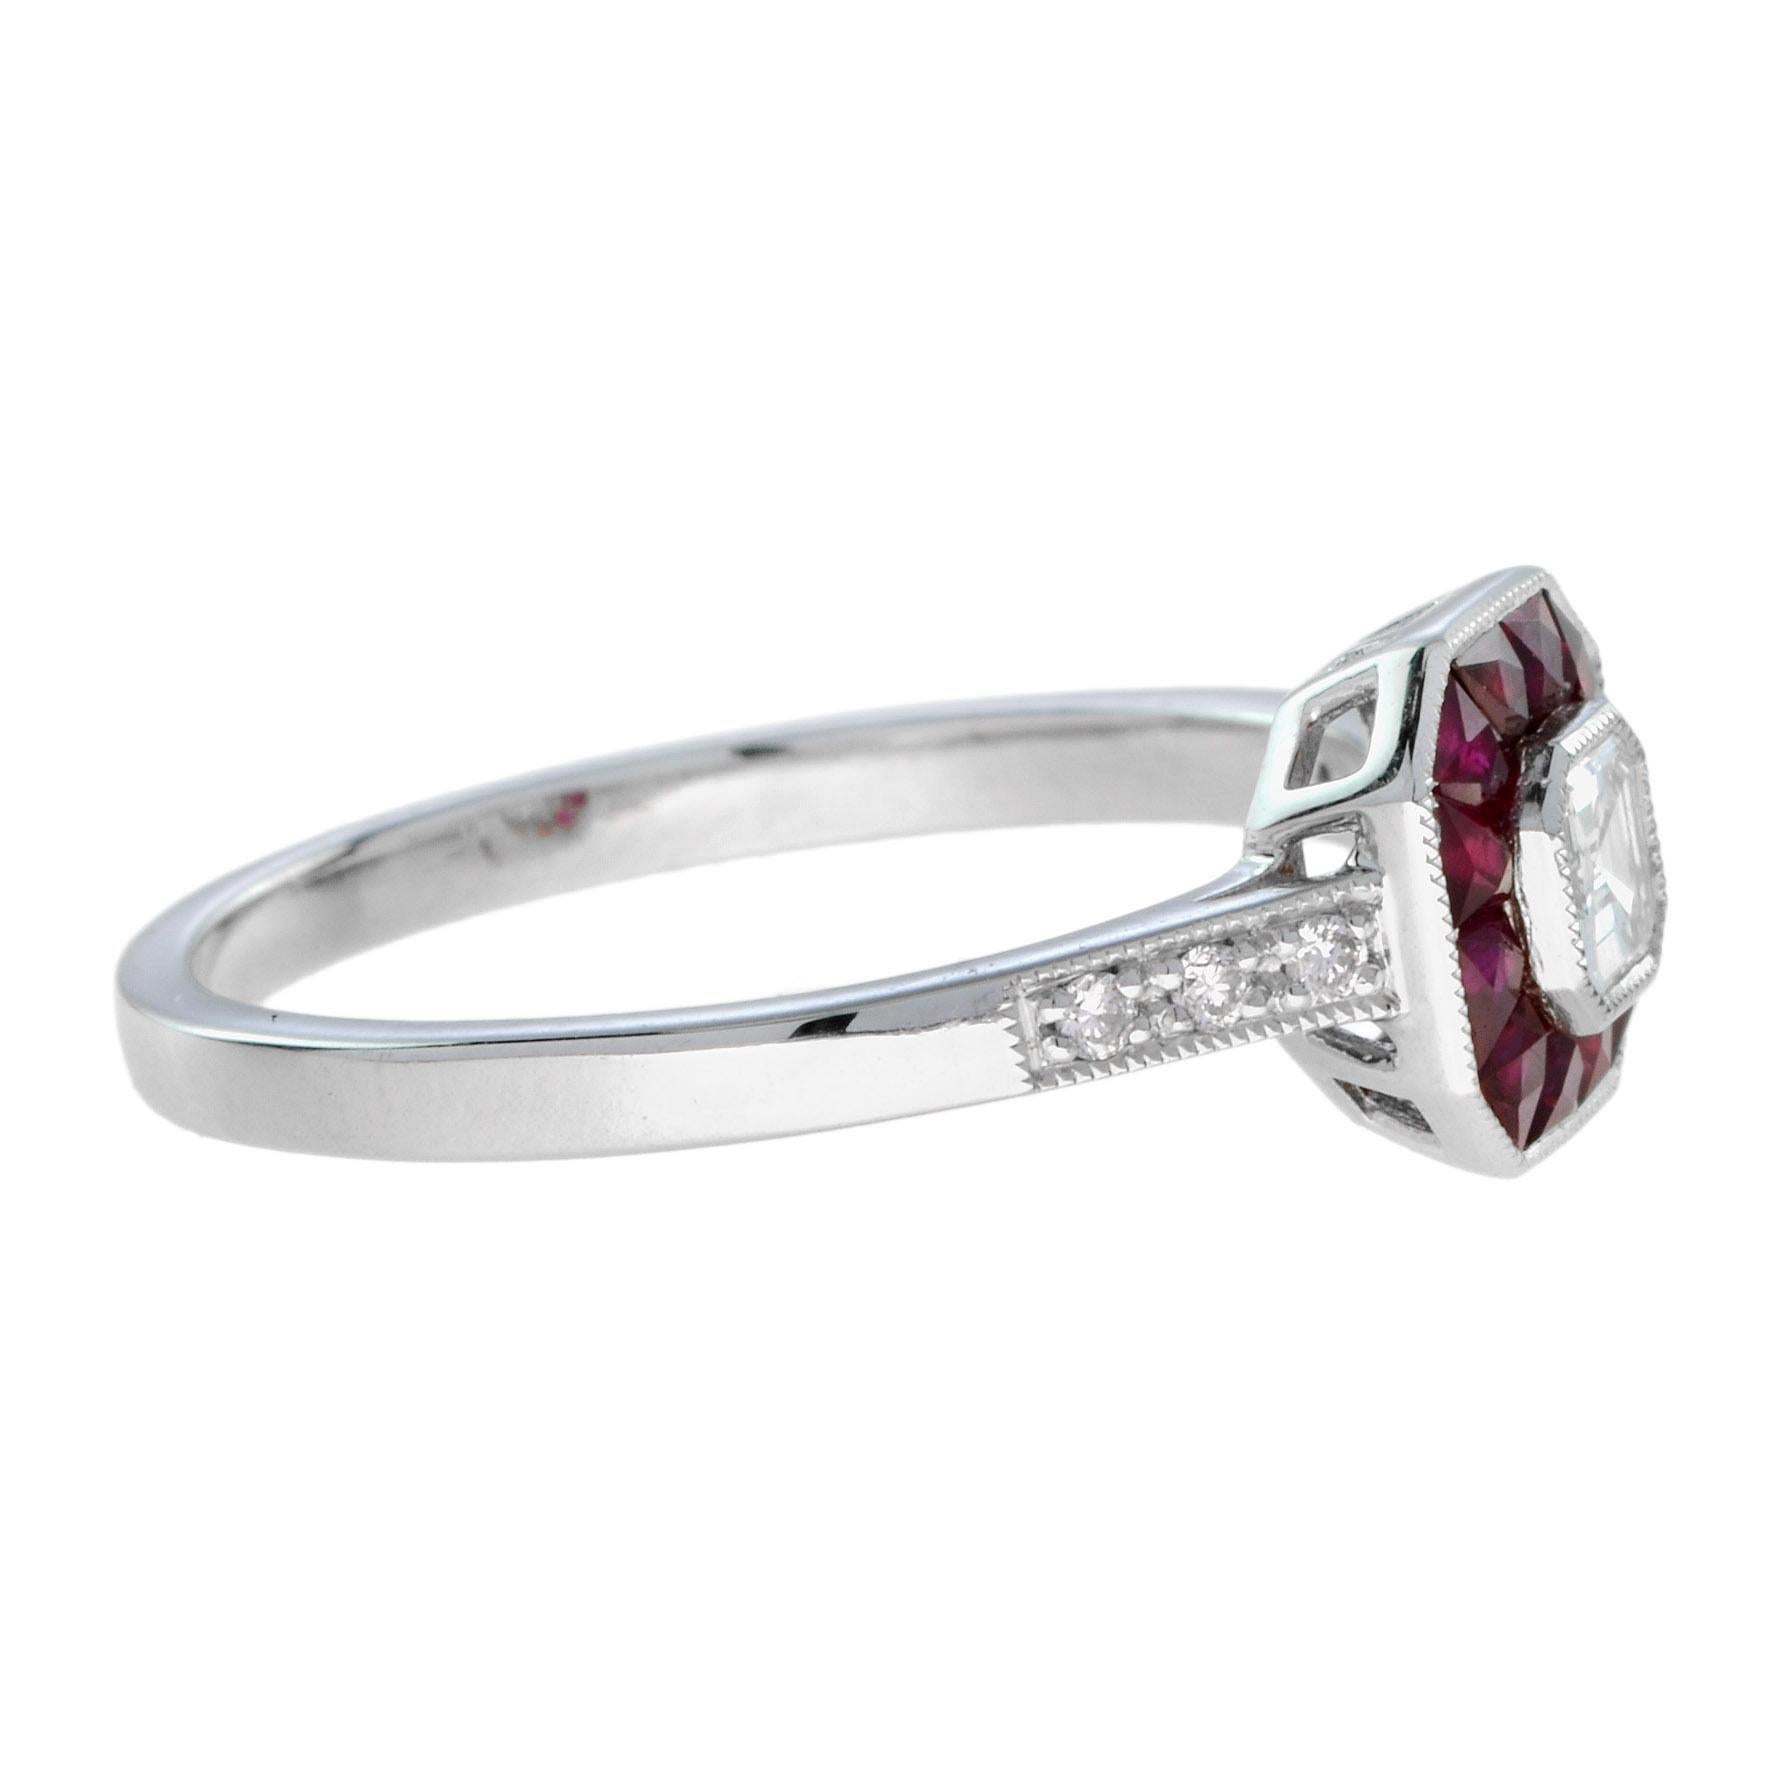 For Sale:  Nova Art Deco Style Emerald Cut Diamond and Ruby Target Ring in 14K White Gold 4